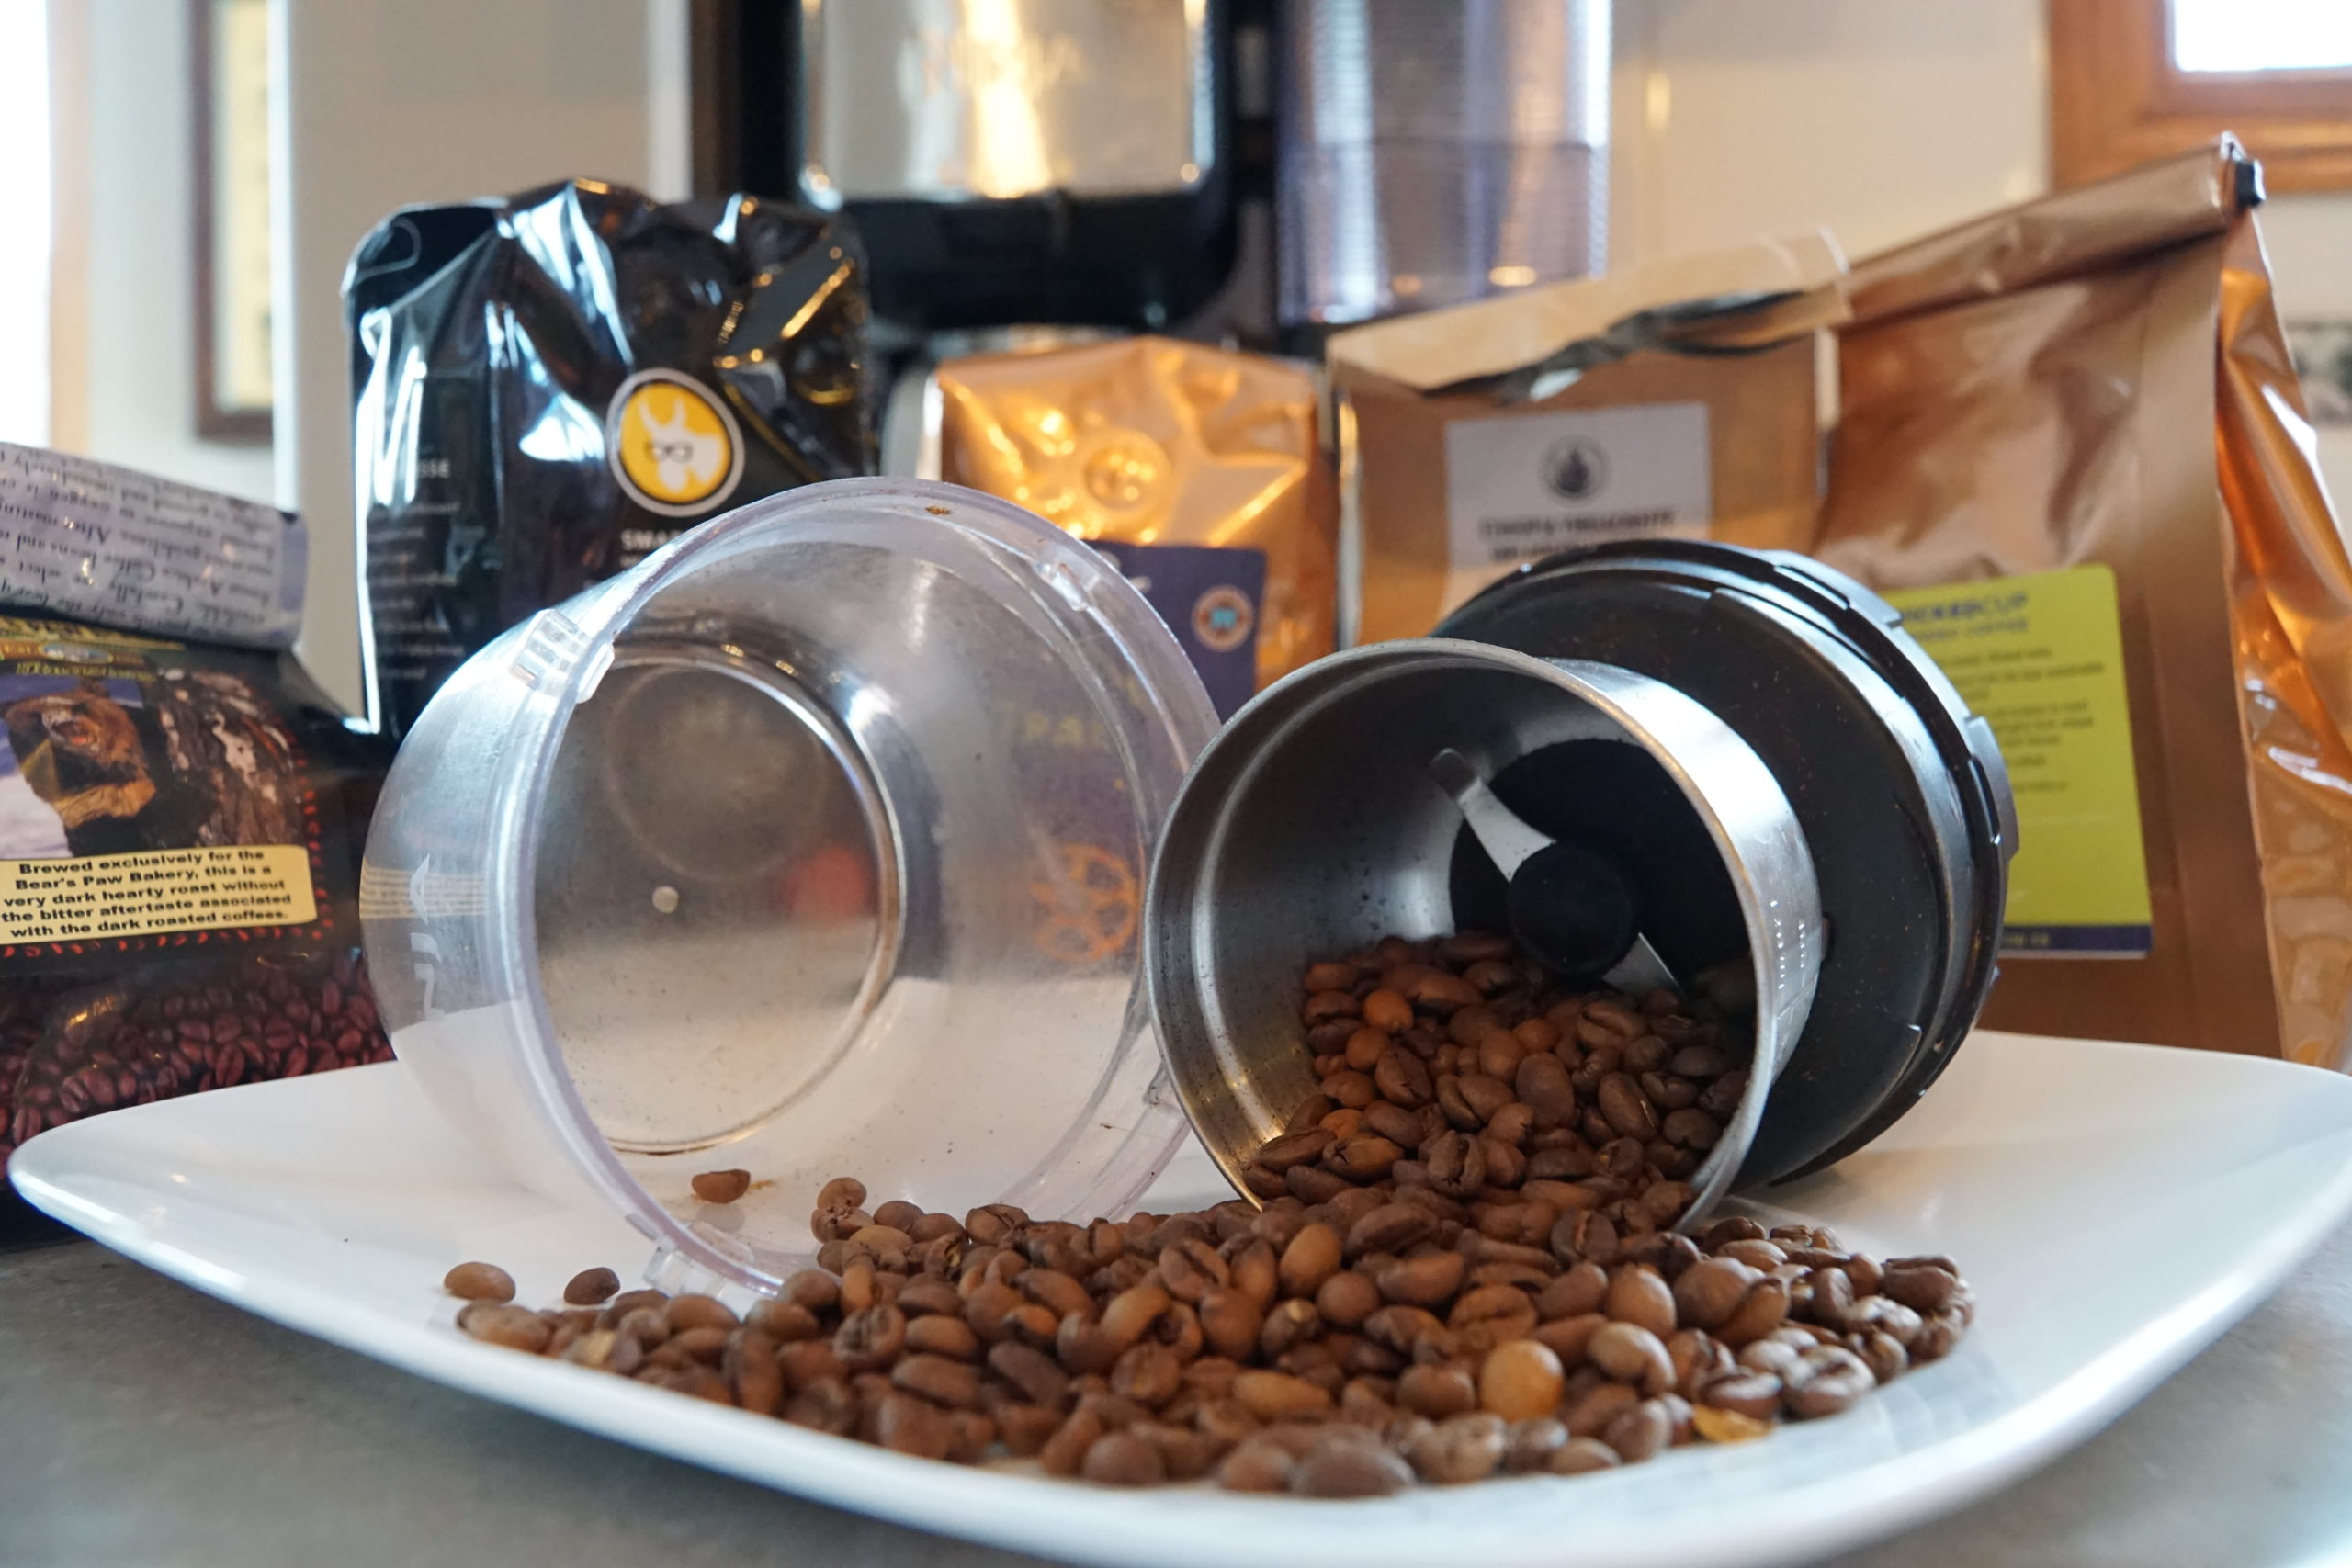 Coffee from a coffee grinder tipped and spread out on a plate